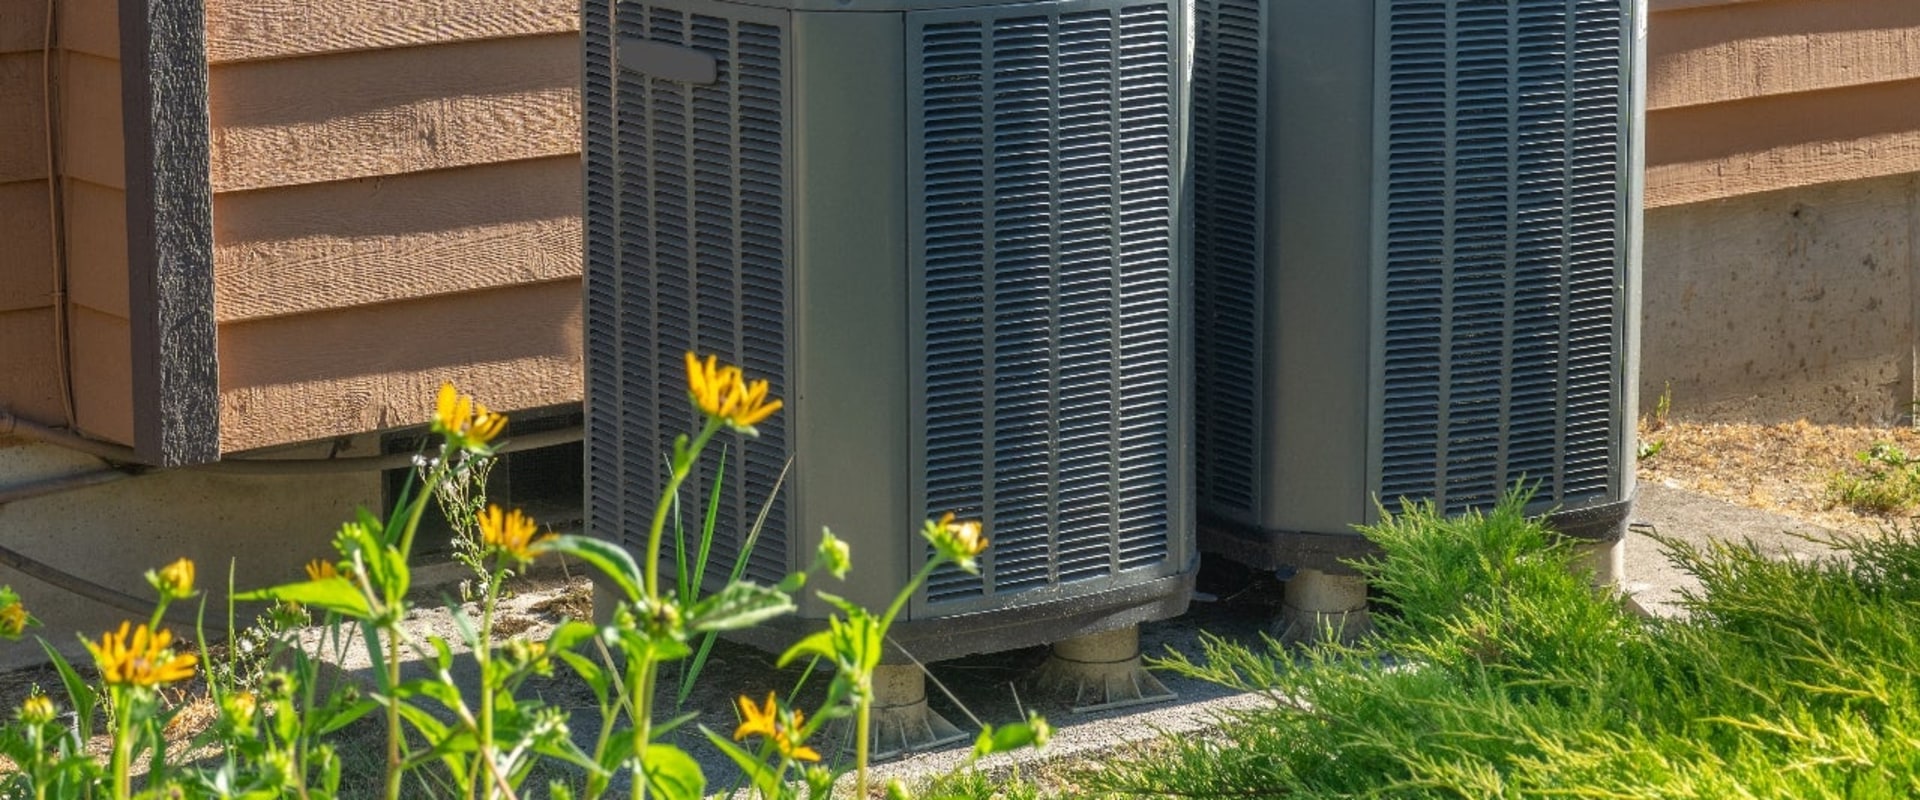 How Long Does it Take to Install a Complete HVAC System?